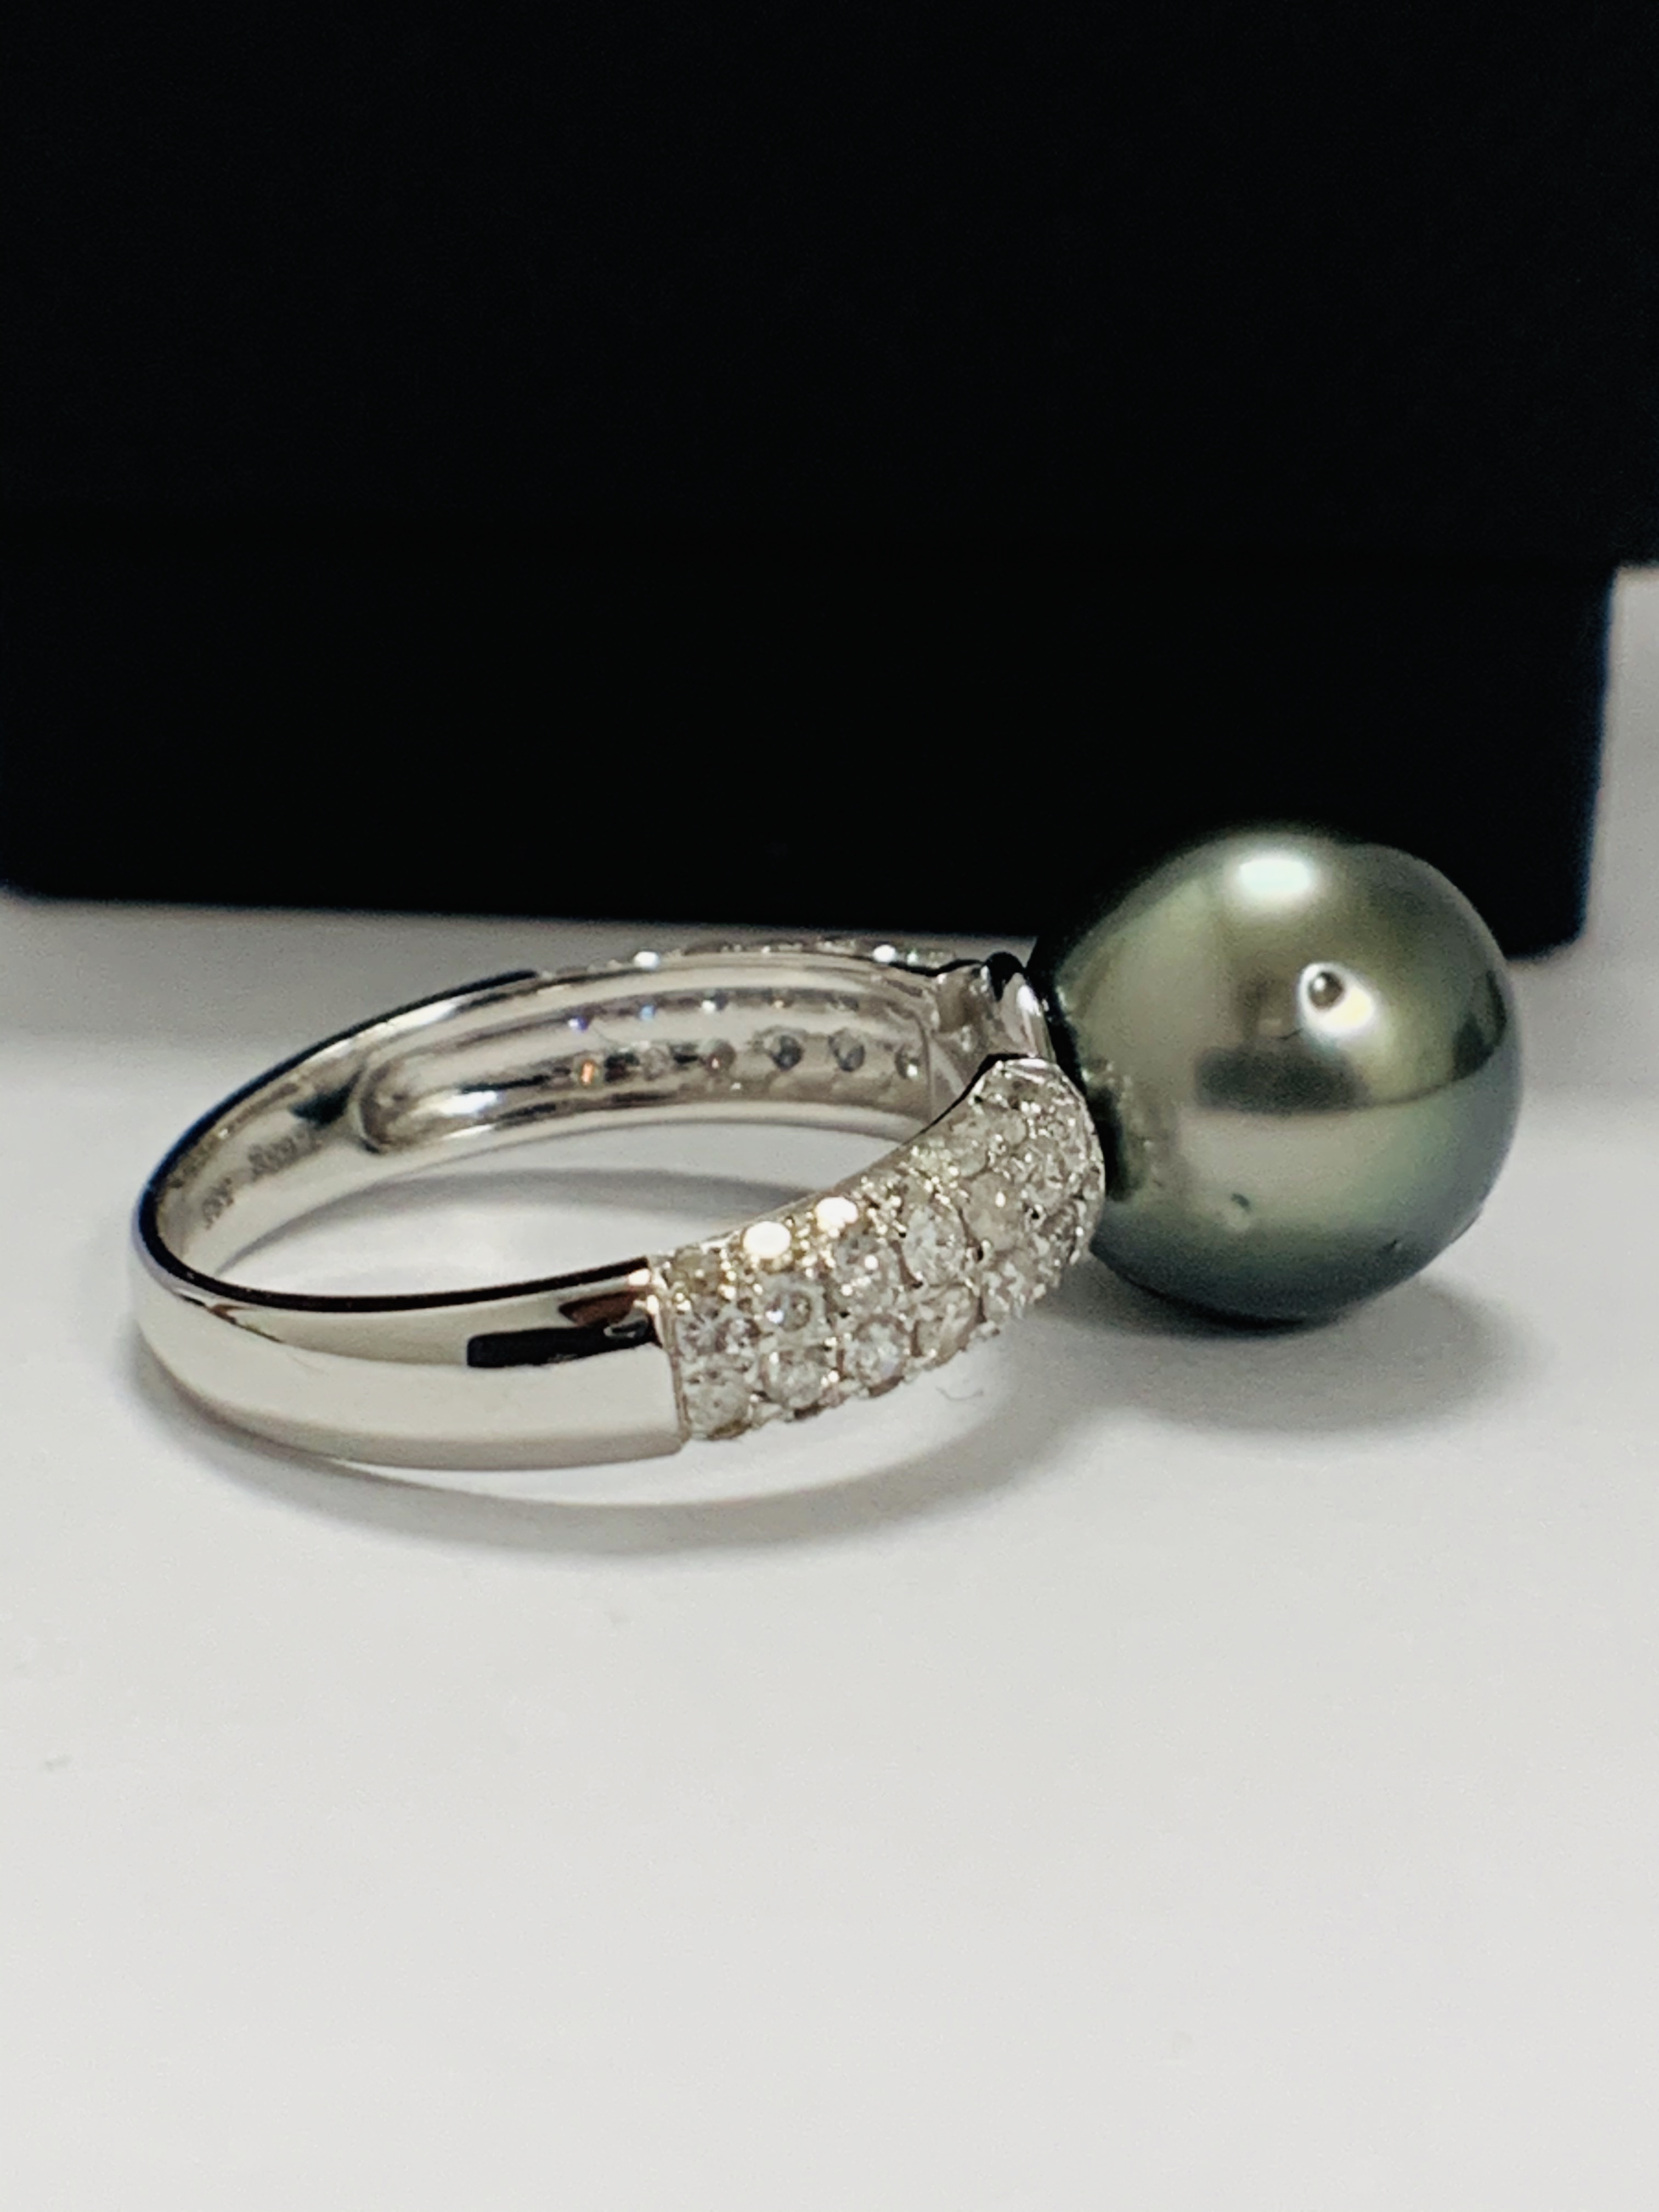 14ct White Gold Pearl and Diamond ring - Image 7 of 15